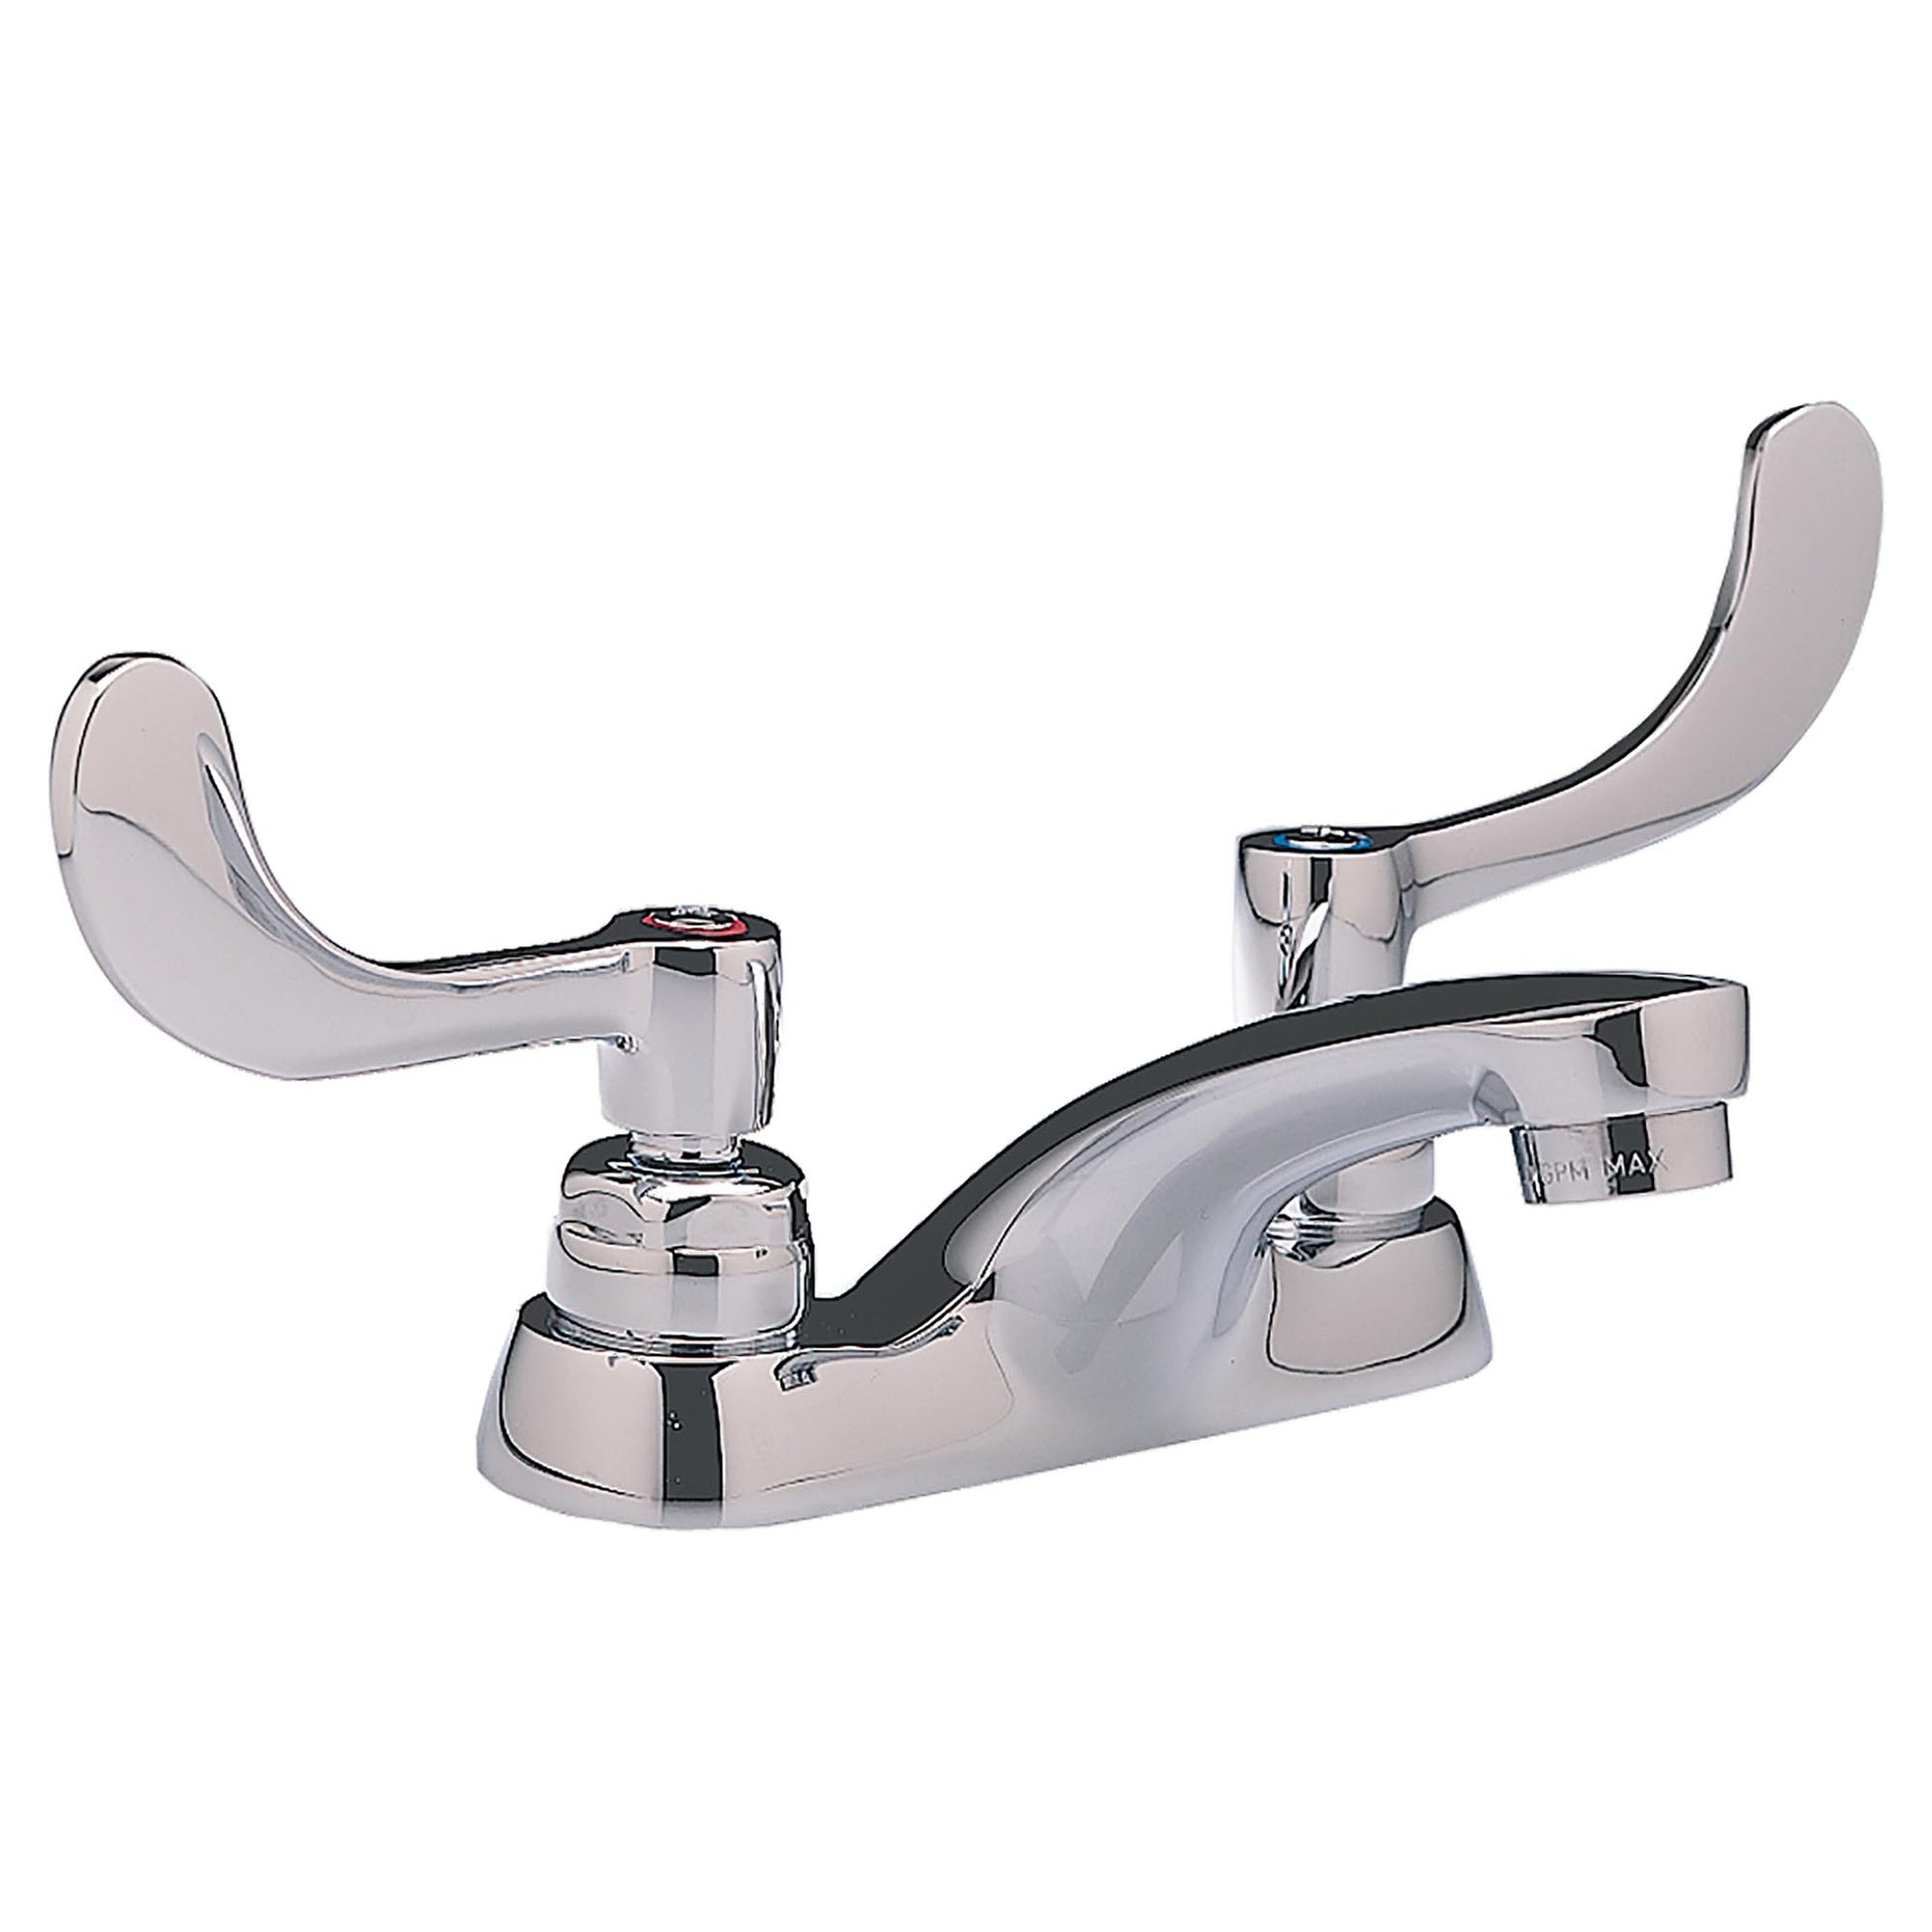 AMERICAN-STANDARD 5500170.002, Monterrey 4-Inch Centerset Cast Faucet With Wrist Blade Handles 1.5 gpm/5.7 Lpm in Chrome